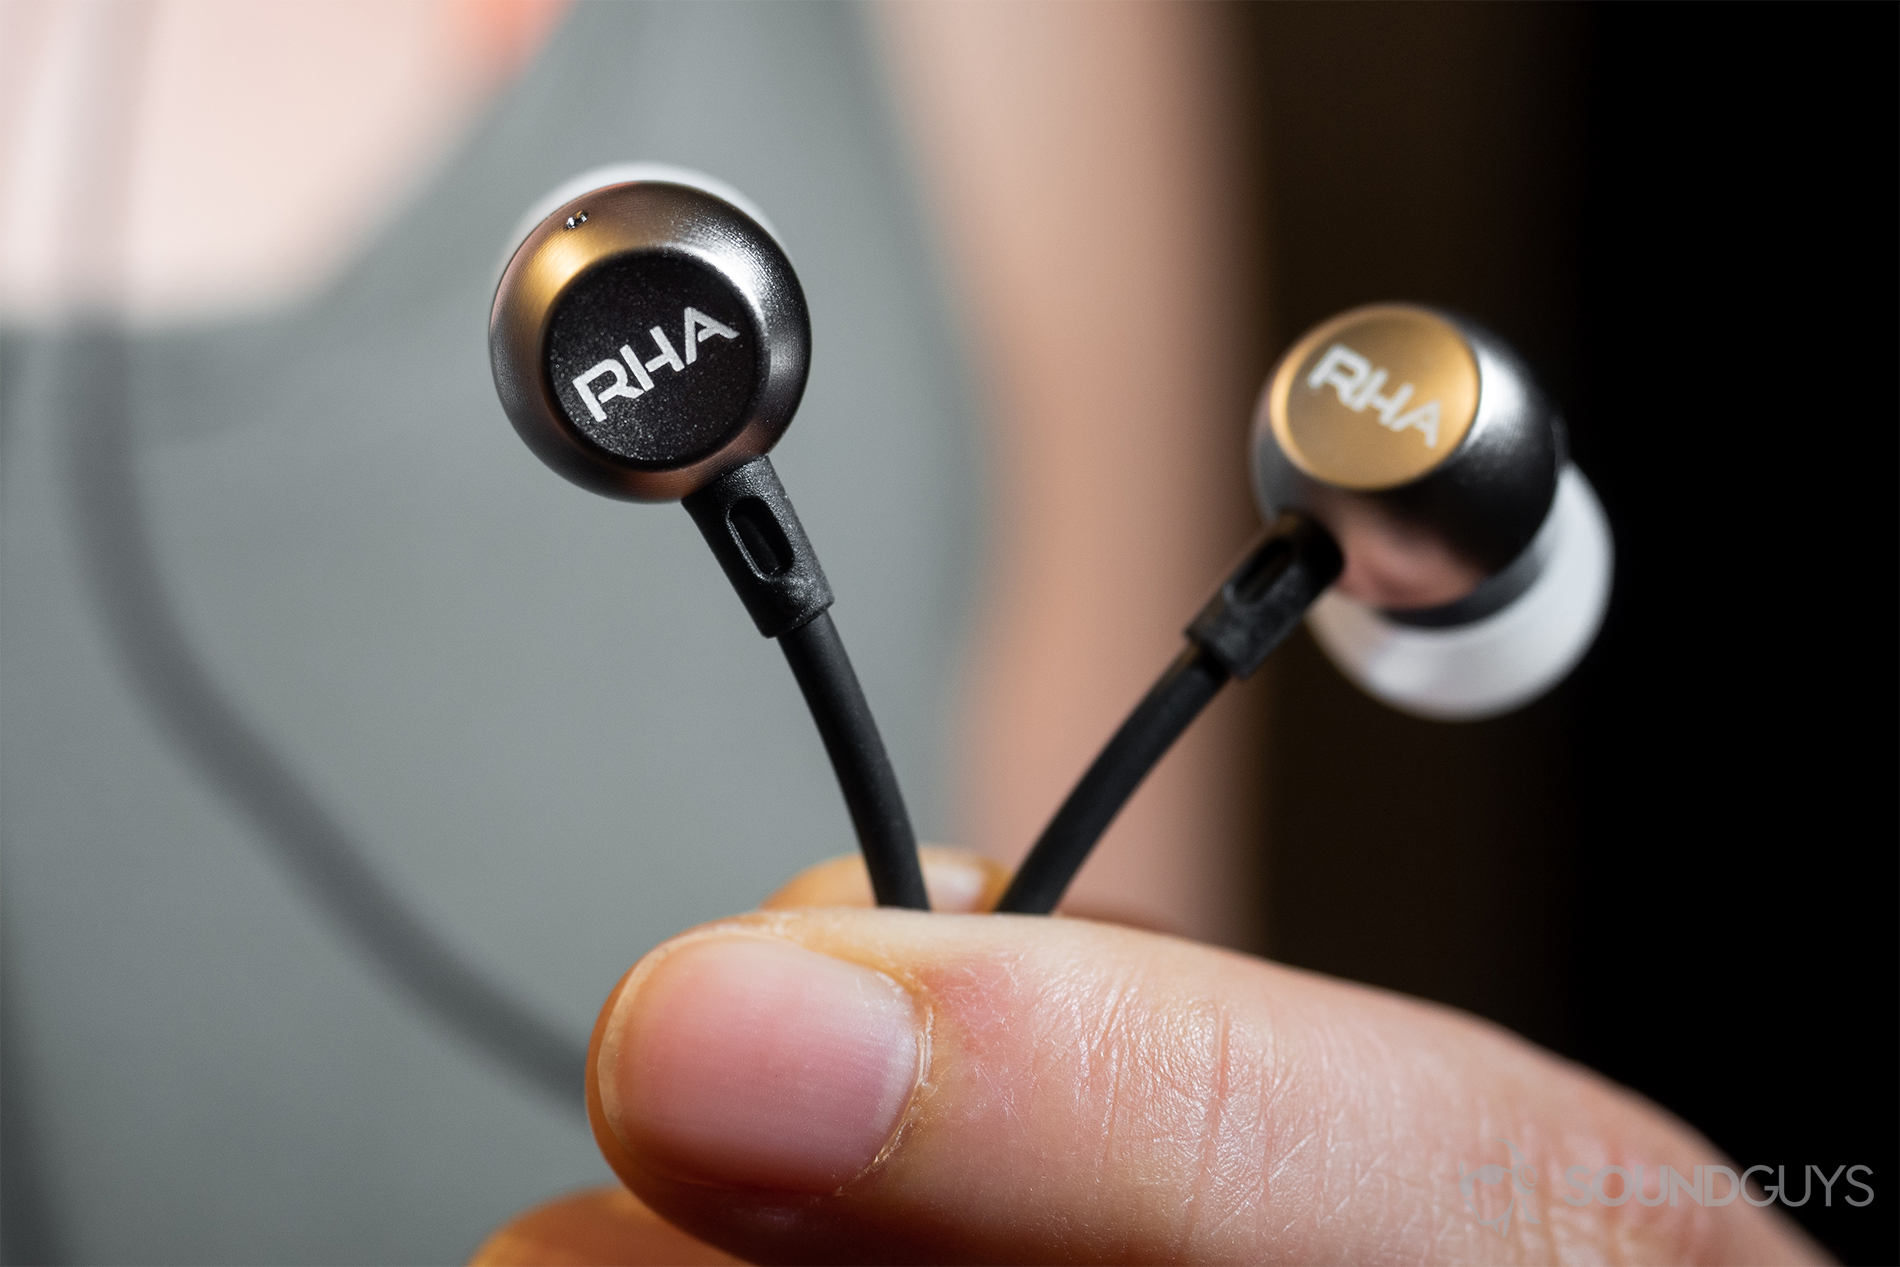 RHA MA390 Wireless: The earbuds in the hand set in front of Lily's torso.